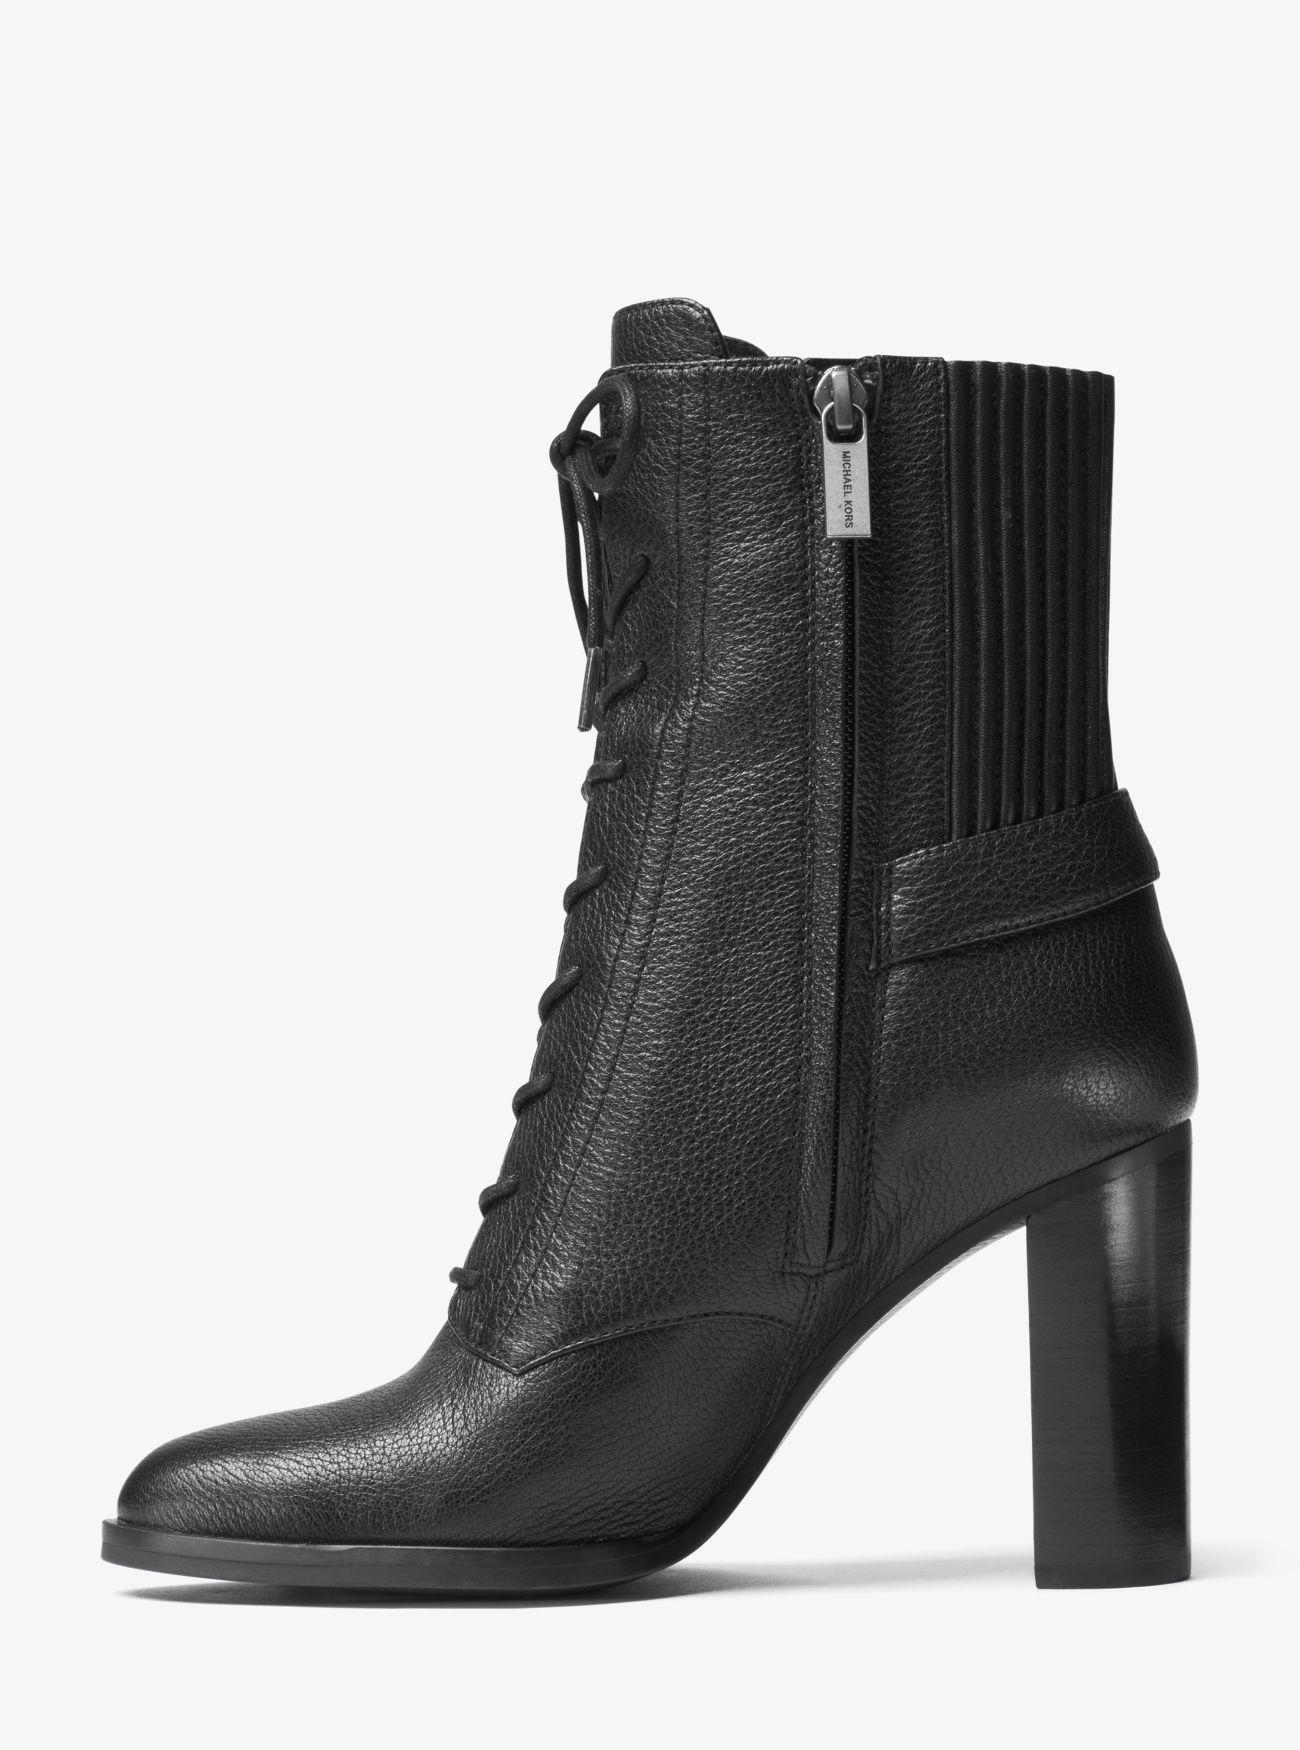 Michael Kors Carrigan Lace-up Leather Ankle Boot in Black - Lyst